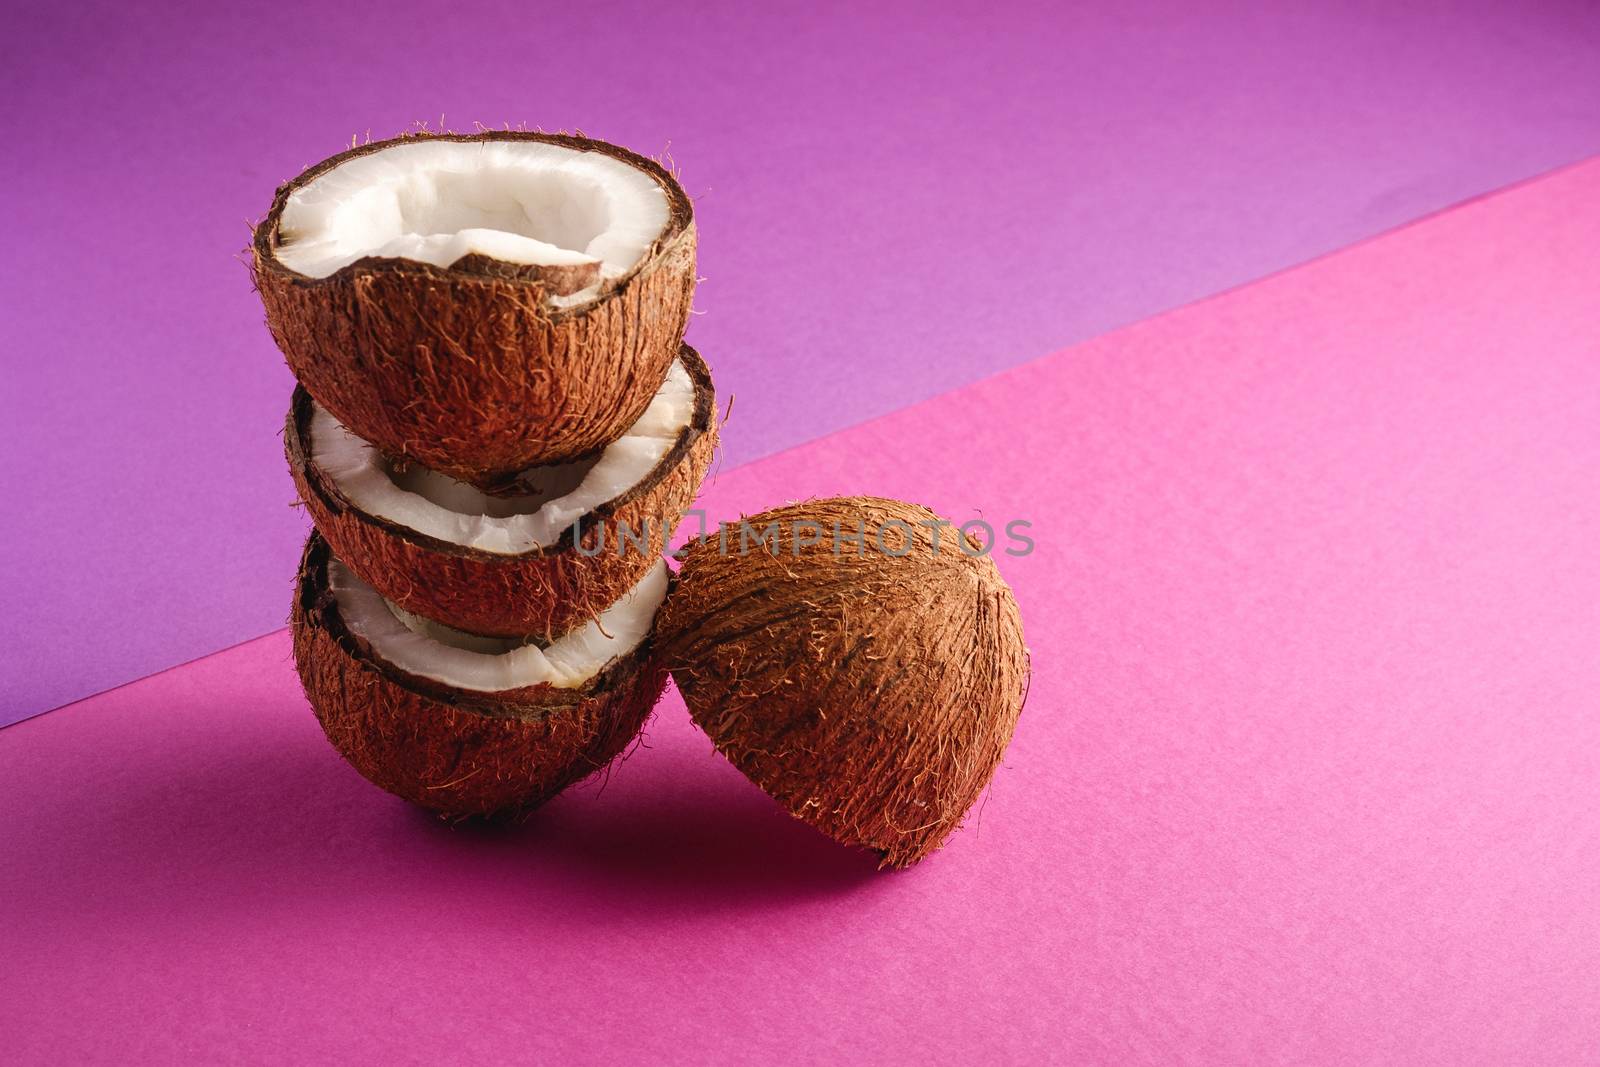 Stacked coconut fruits on violet and purple plain background by Frostroomhead